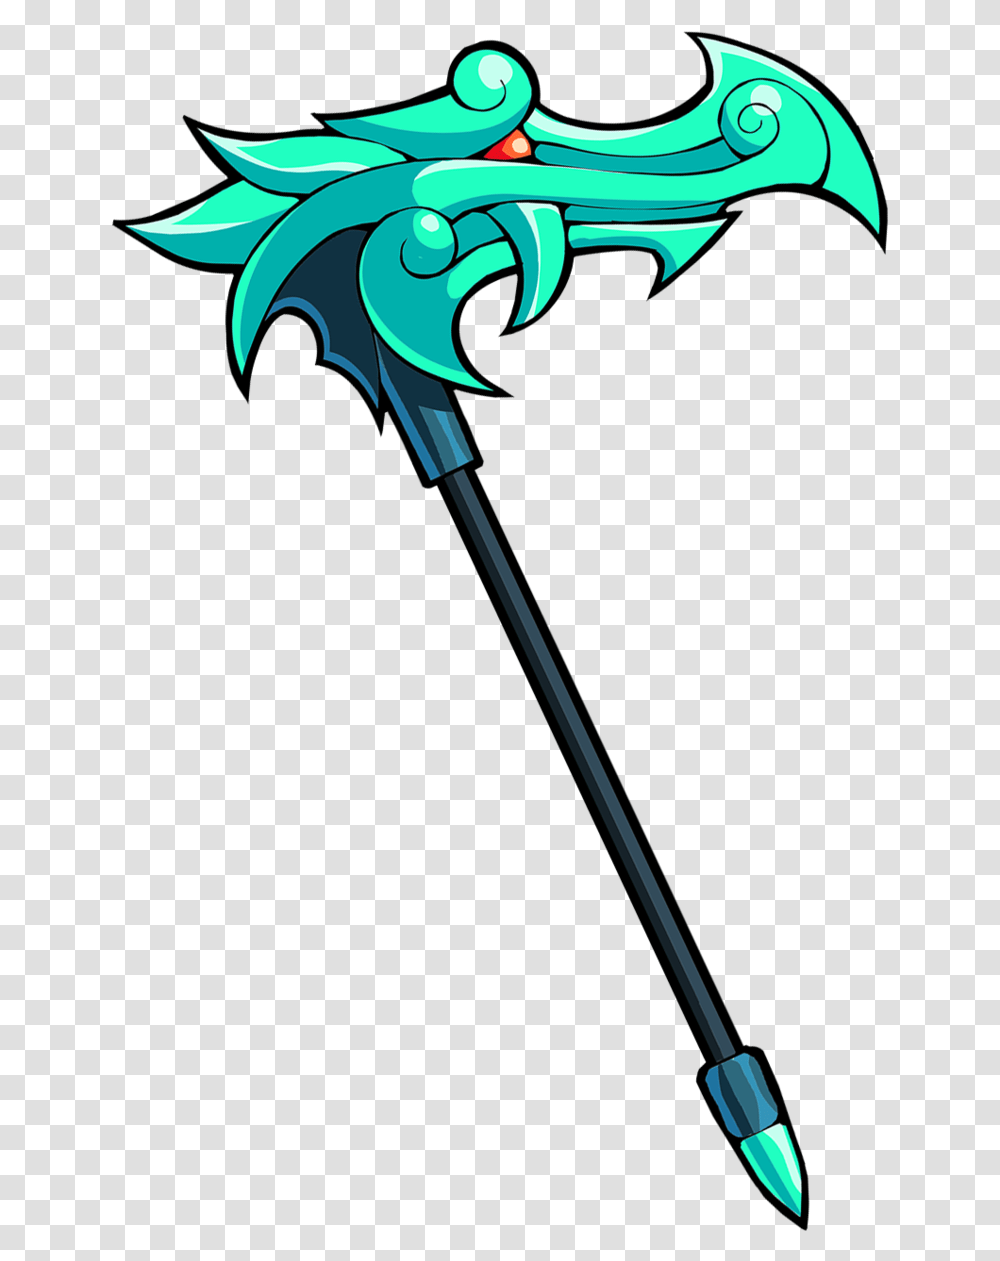 Brawlhalla Weapons, Weaponry, Axe, Tool Transparent Png